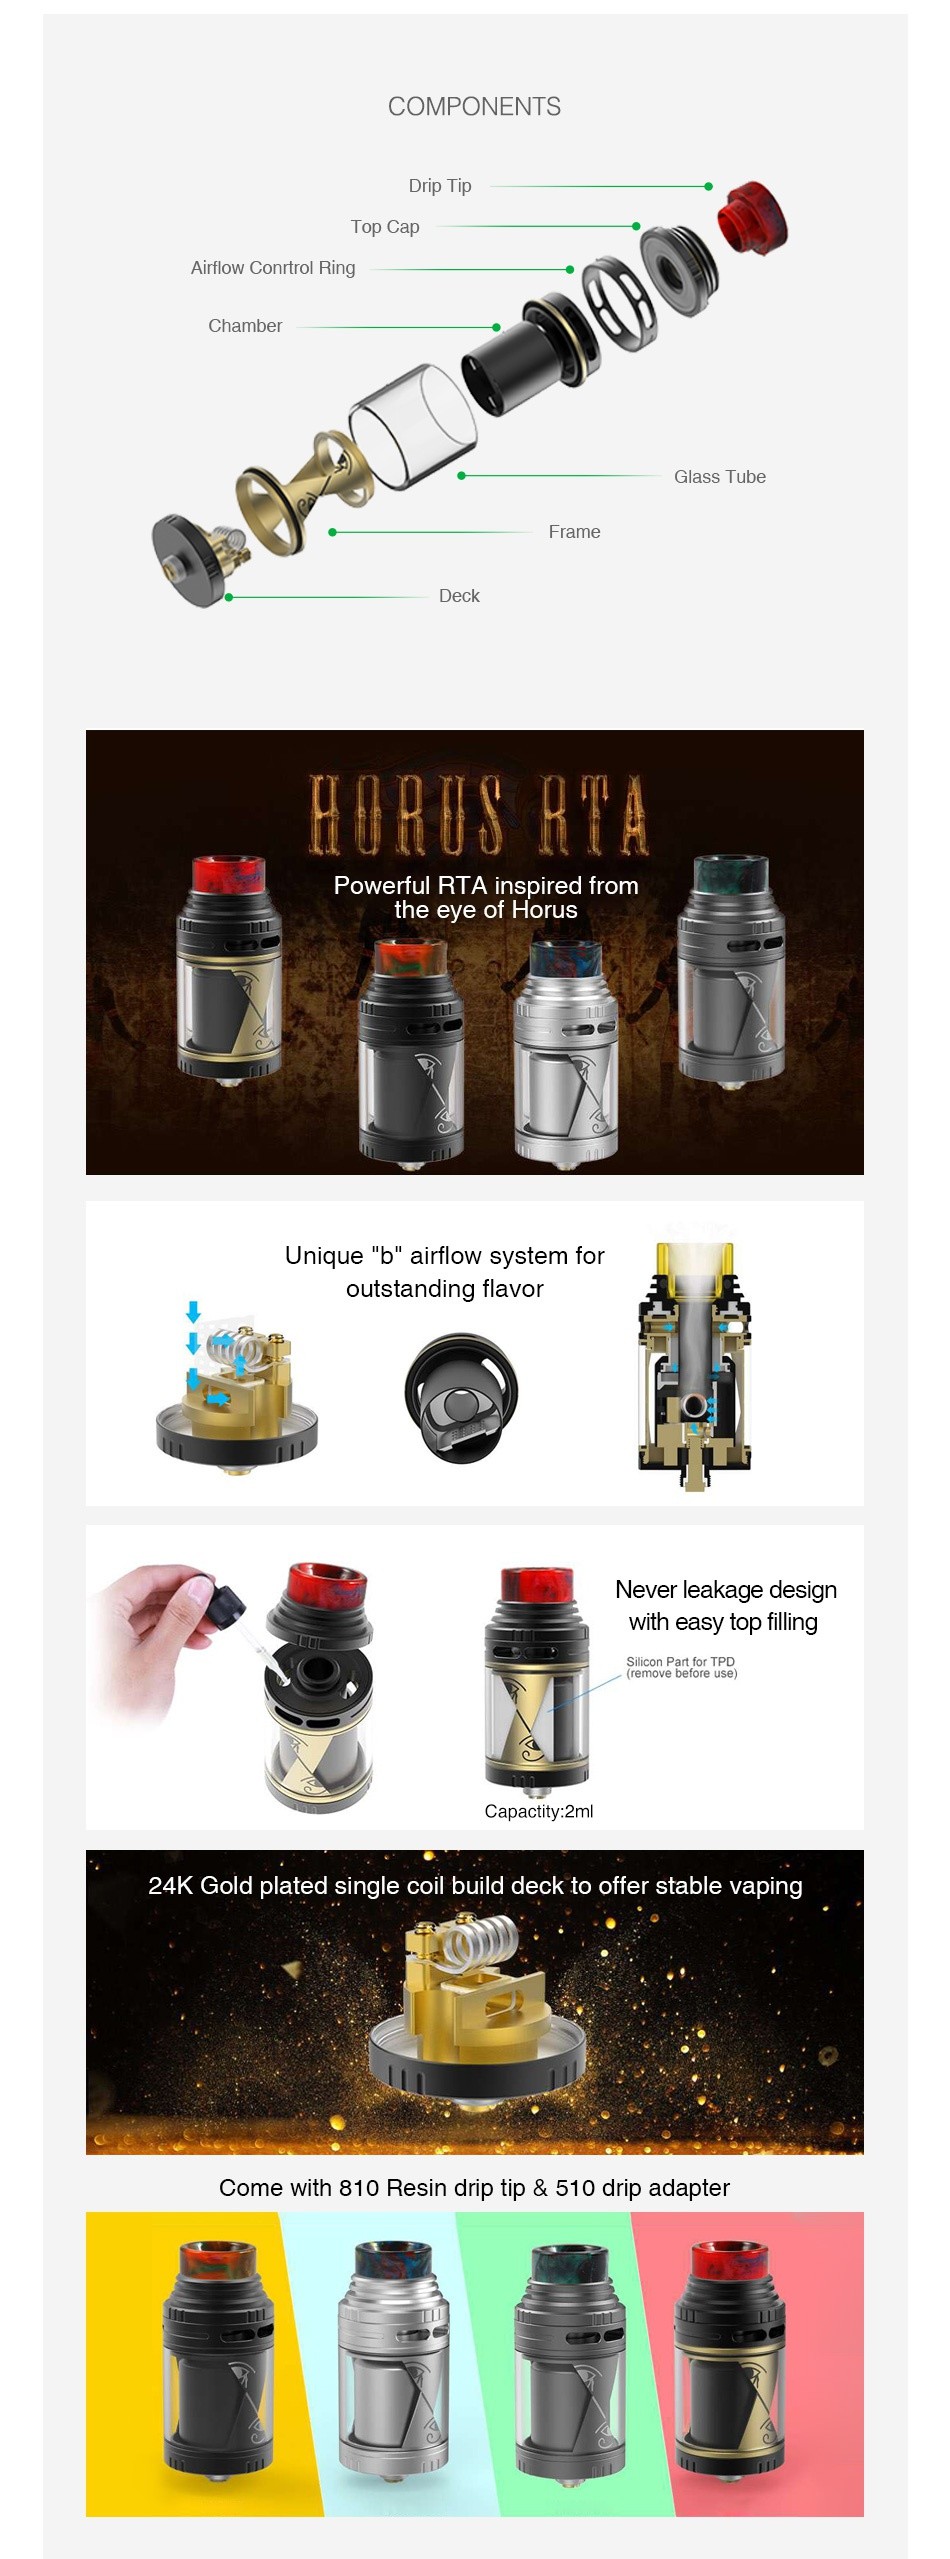 Vapefly Horus RTA 4ml COMP  NENTS Airflow Conrtrol Ring Chamber Deck HURUSHTA Powerful ri a inspired from t Unique b  airflow system for outstanding flavor      Never leakage desigr ith Capactity  2ml 24K Gold plated single coil build deck to offer stable vaping Come with 810 Resin drip tip  510 drip adapter